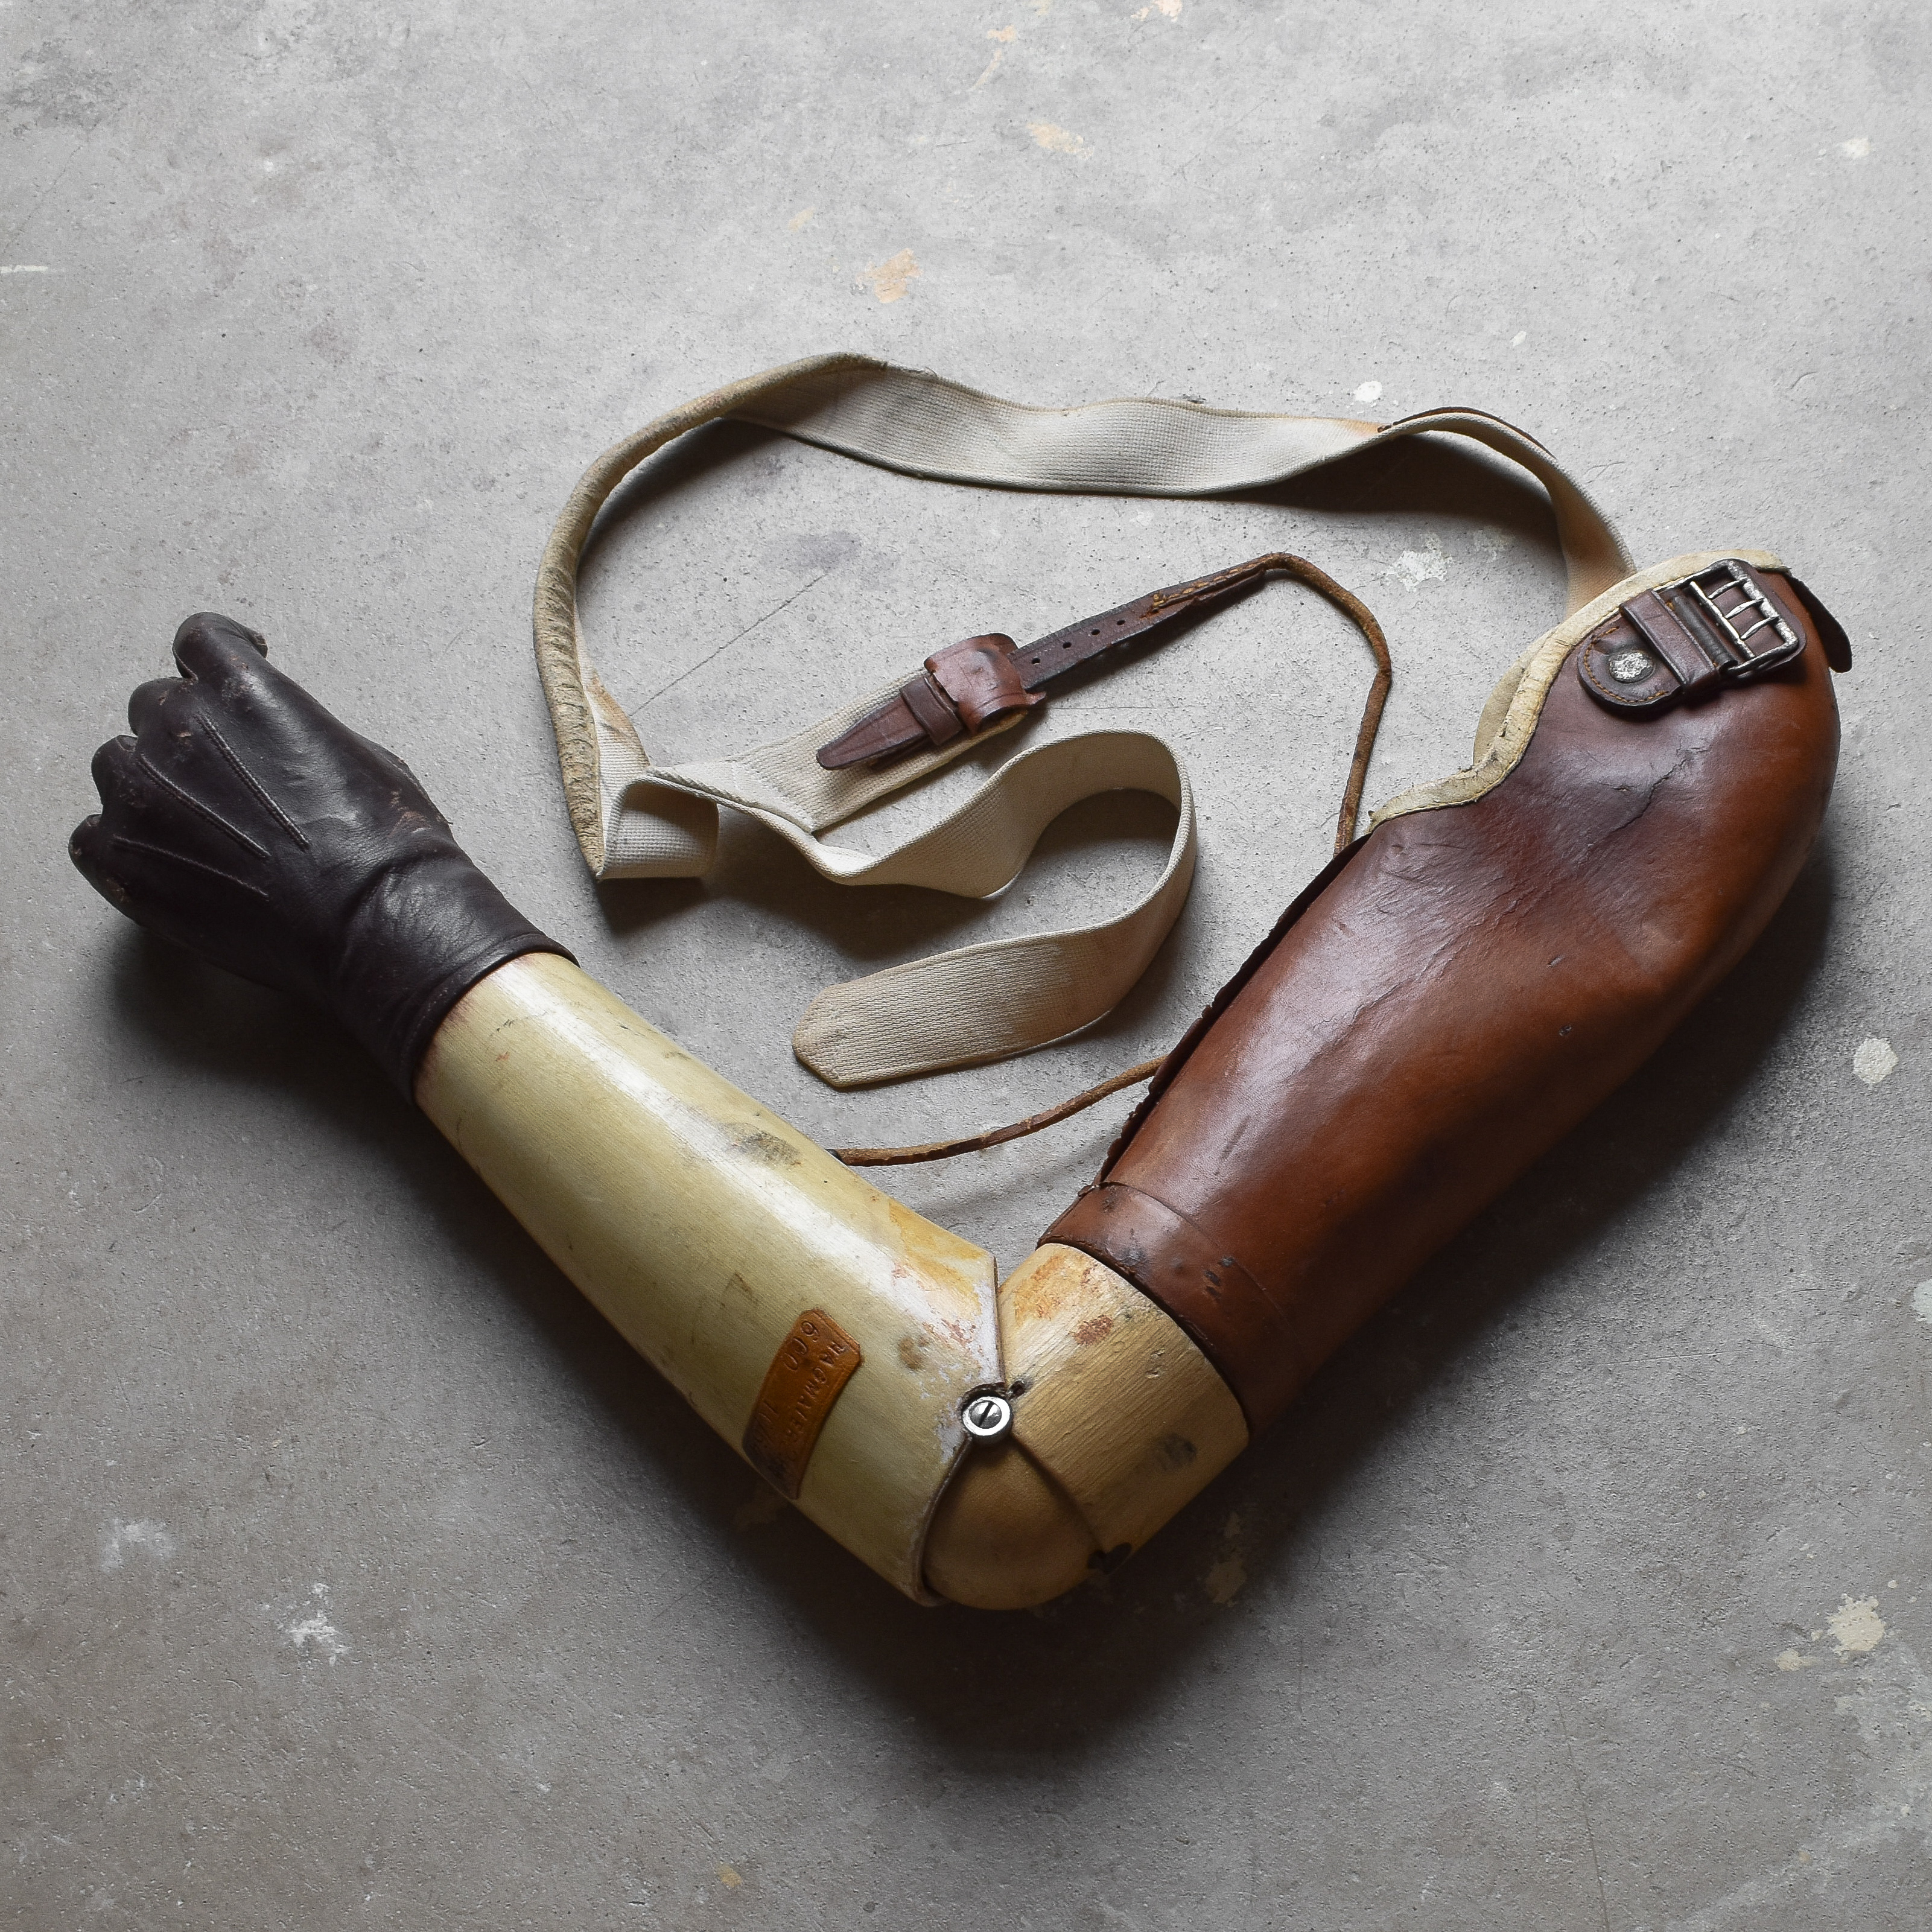 Antique Vintage 30s 1930s Prosthetic Arm Prosthesis Leather Curiosity Oddity Curiosities Medical Anatomy Collection Rustic